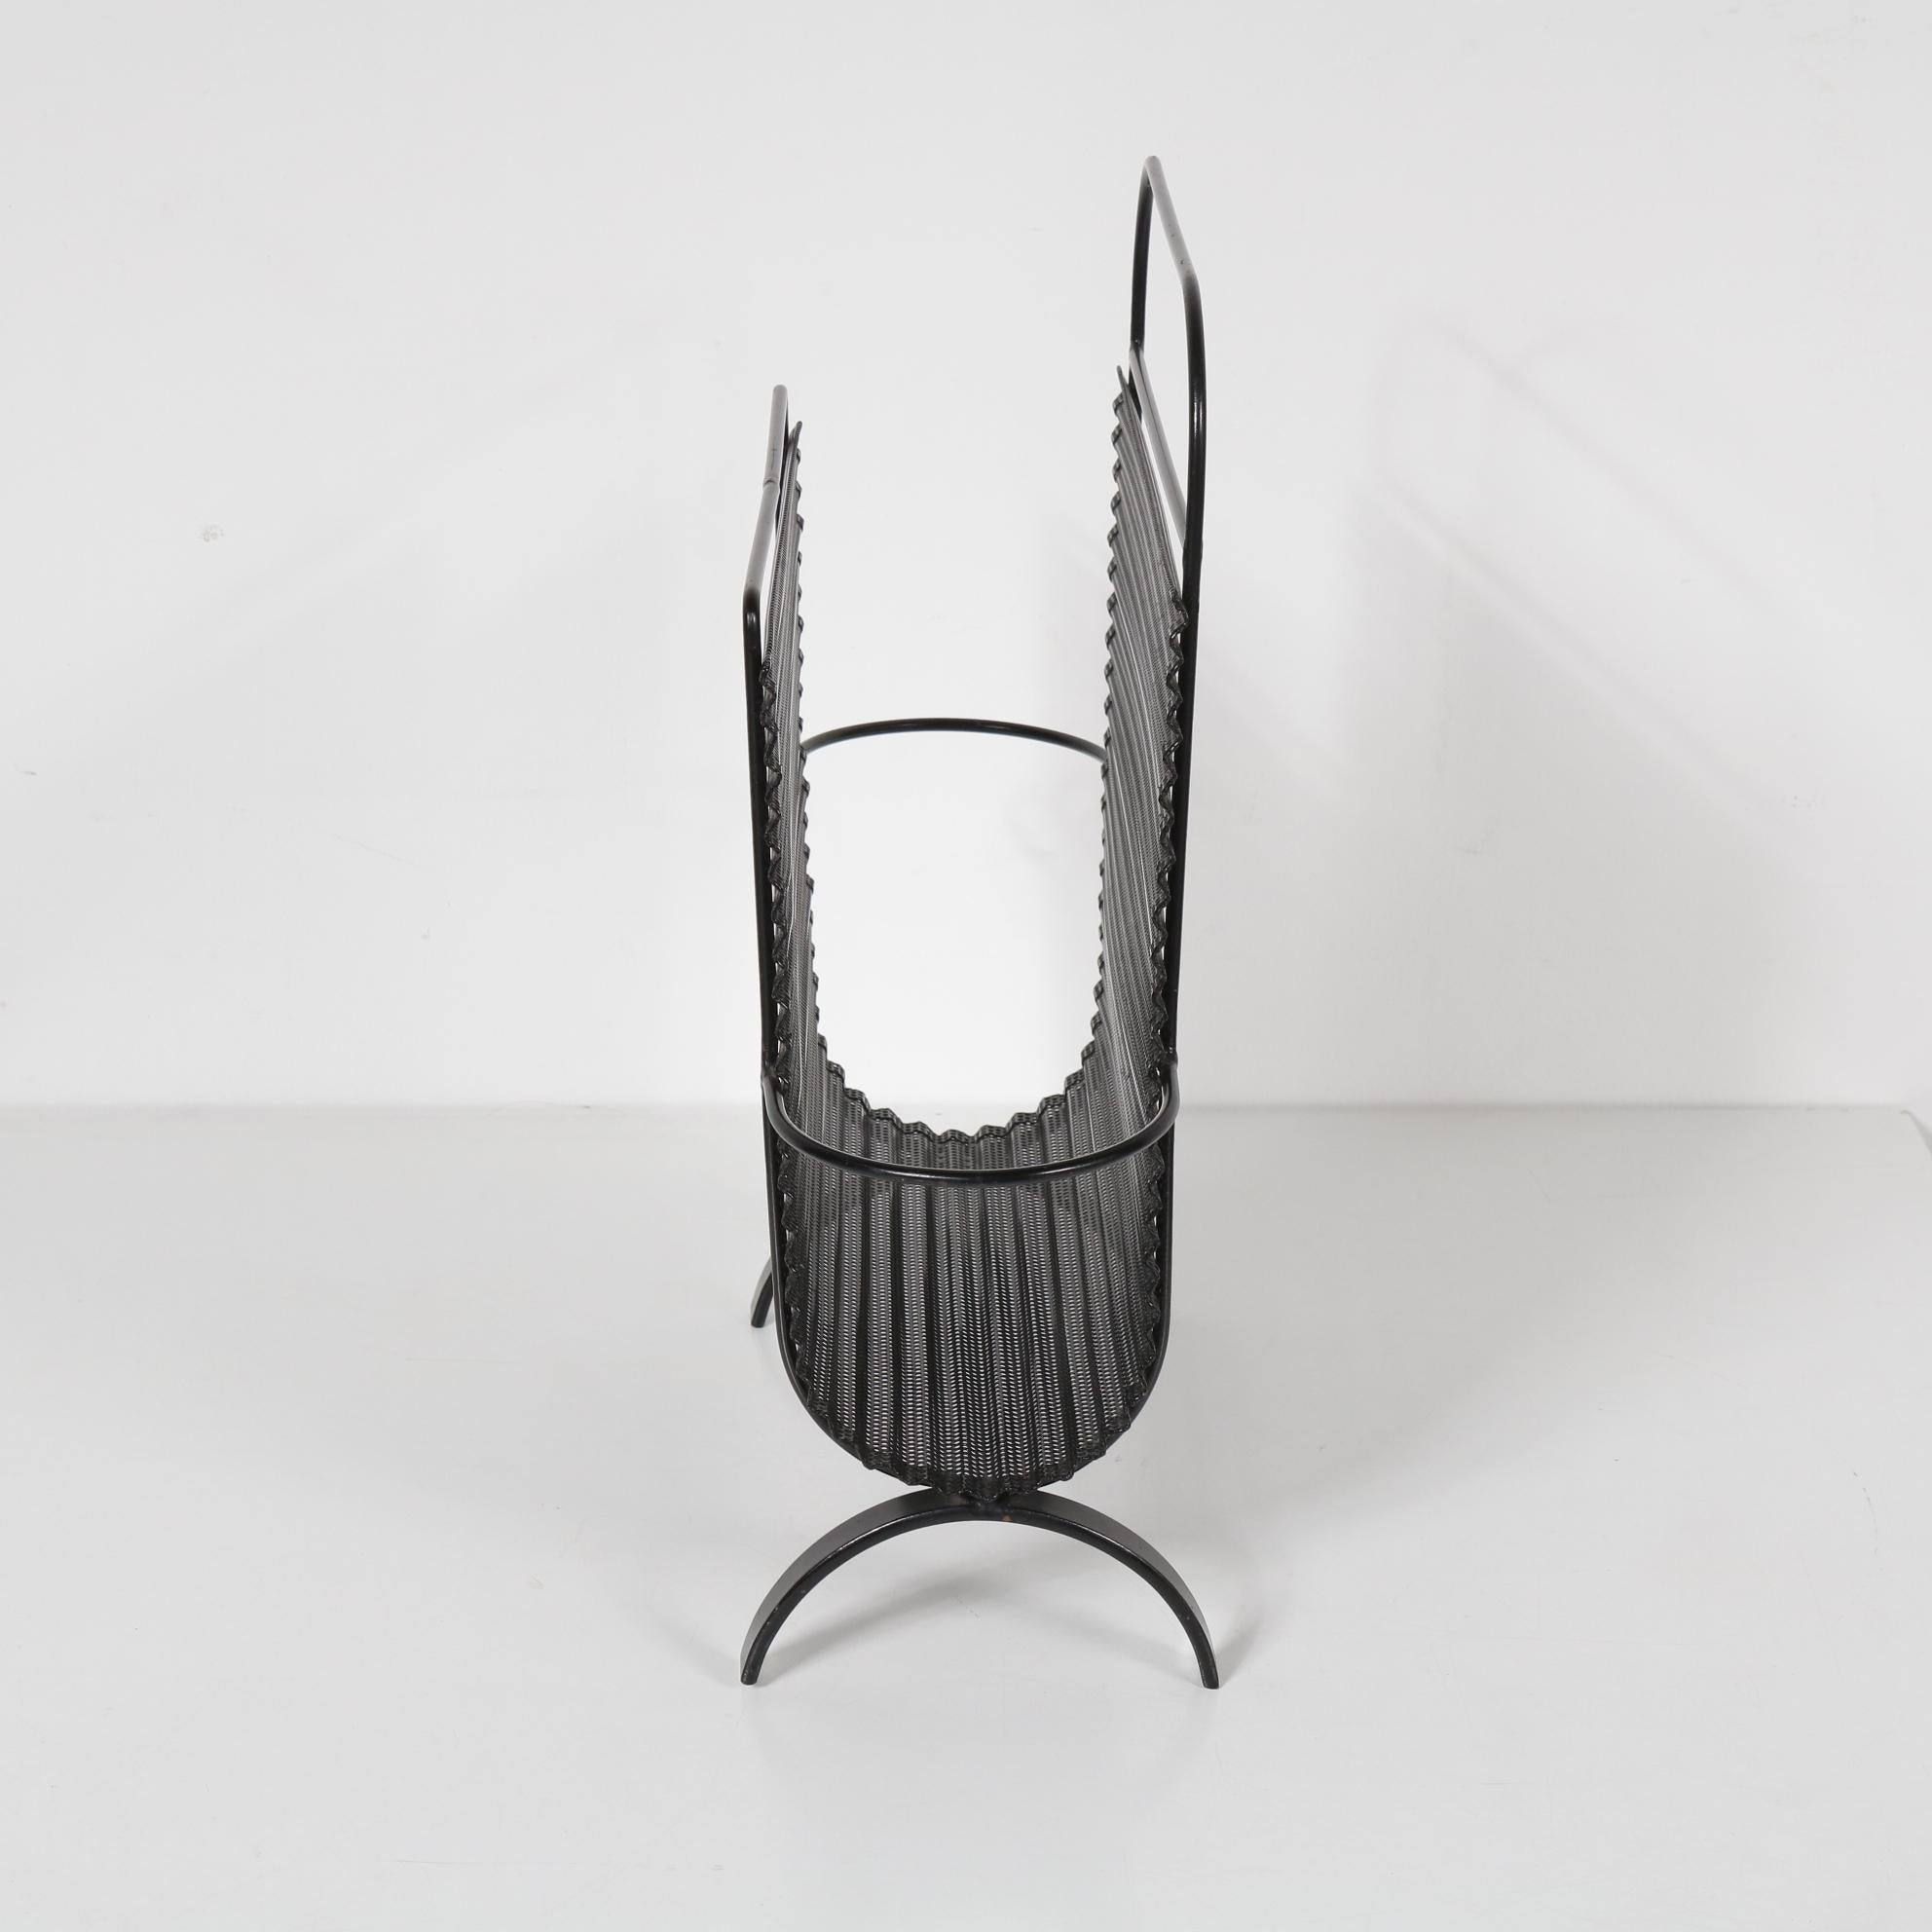 A beautiful elegant magazine rack, model Harpers, designed by Mathieu Matégot and manufactured by Atelier Matégot in France, circa 1950.

This iconic piece is made of high quality black lacquered metal. The structure is folded and the metal panels